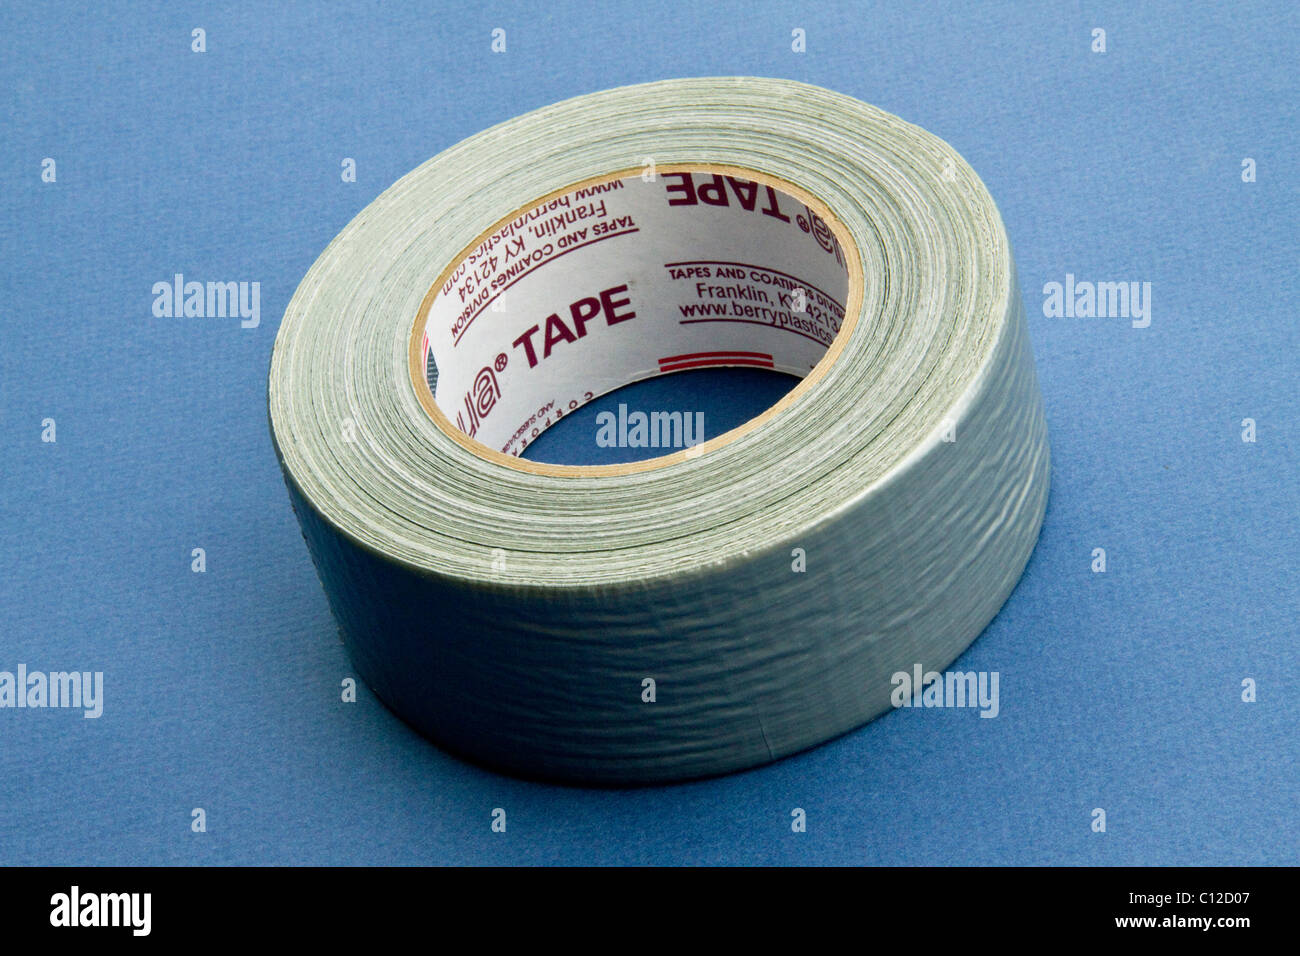 Double-sided Duct Tape Duct Tapes Double Side Duct Tapes Practical